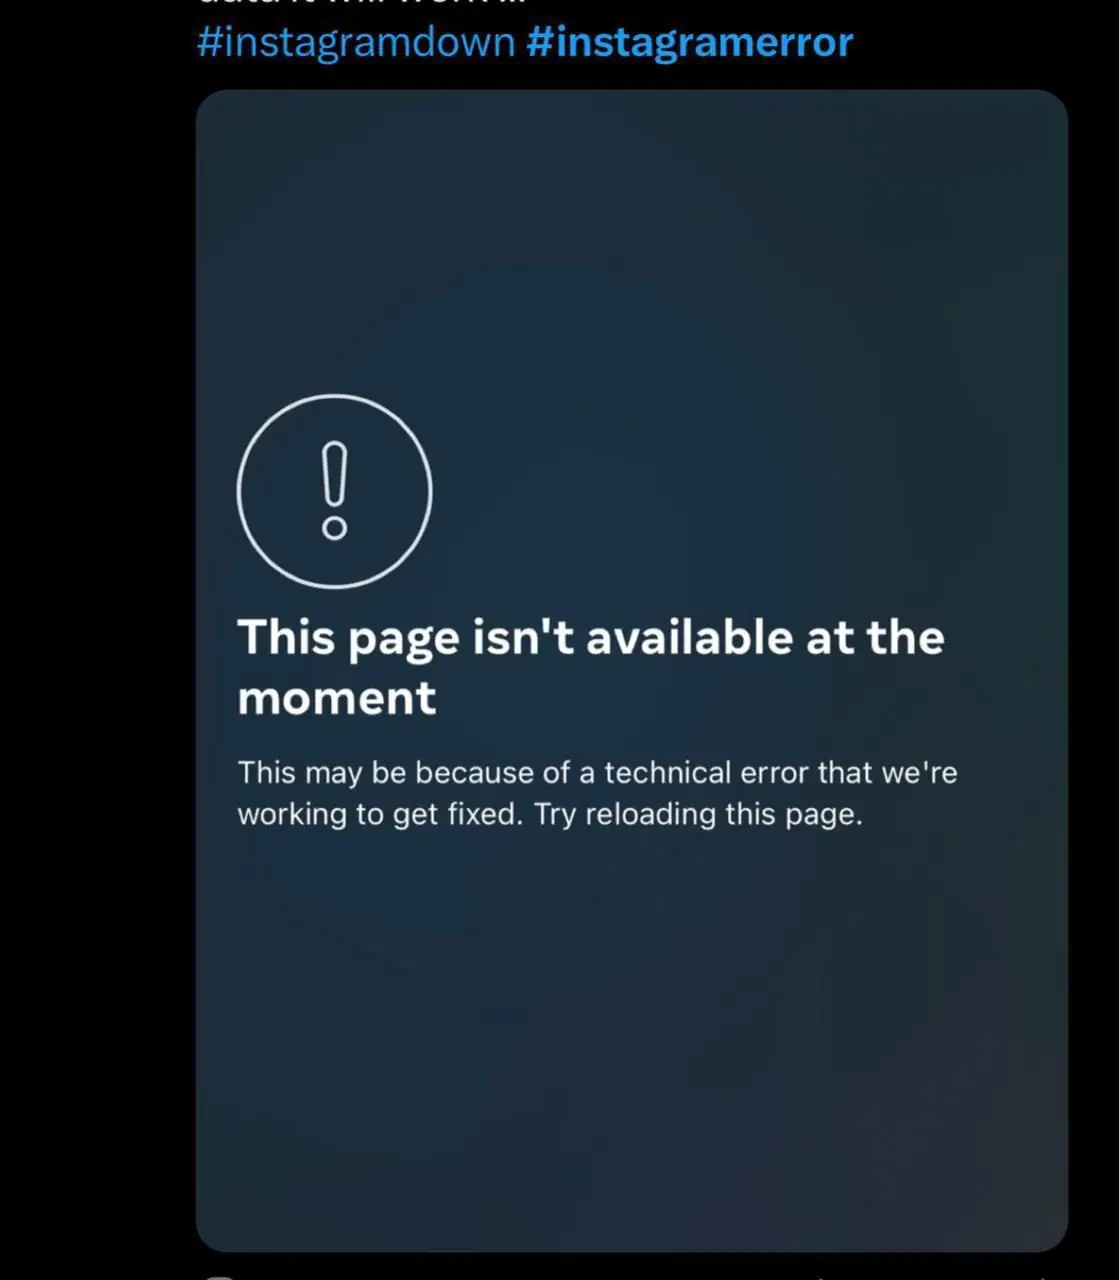 Page isn't available now